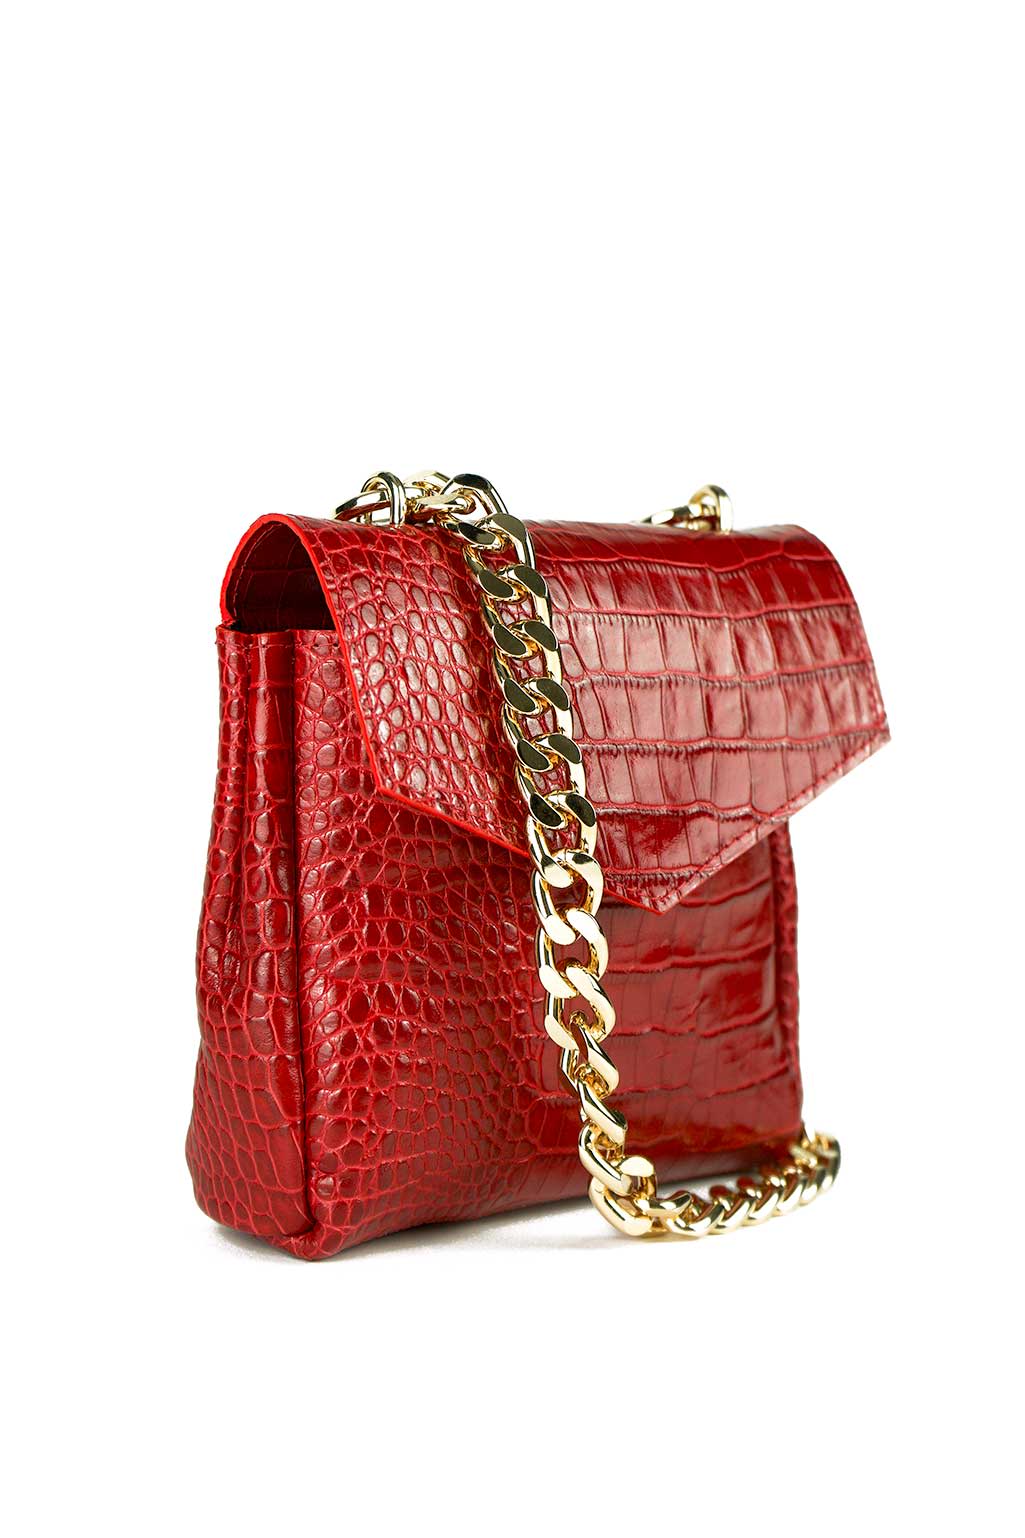 Ruby Red Patent Leather Tote Bag